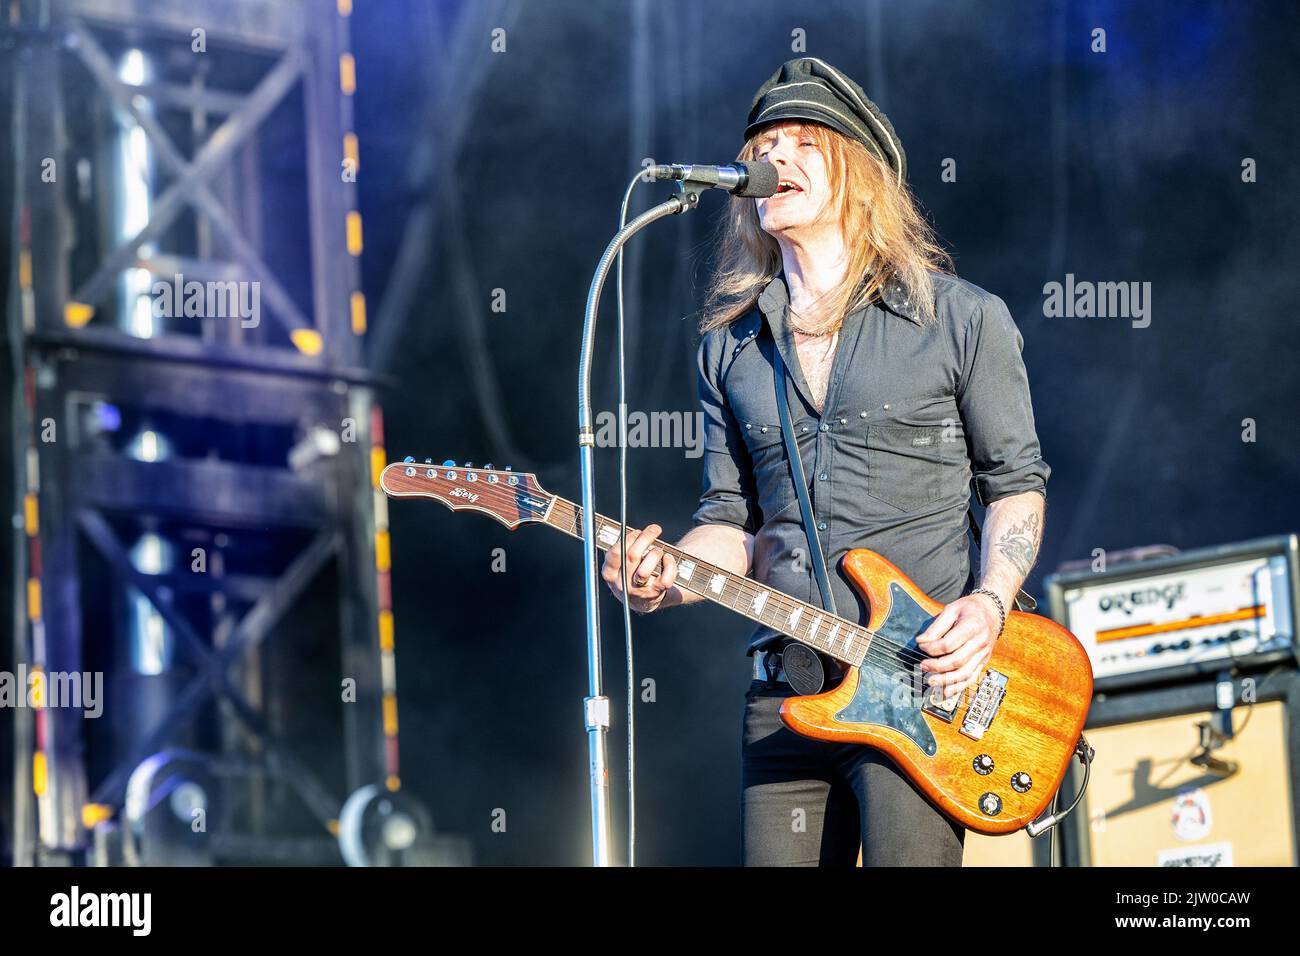 Solvesborg, Sweden. 10th, June 2022. The Swedish hard rock band The Hellacopters performs a live concert during the Swedish music festival Sweden Rock Festival 2022 in Solvesborg. Here vocalist and guitarist Nicke Andersson is seen live on stage. (Photo credit: Gonzales Photo - Terje Dokken). Stock Photo